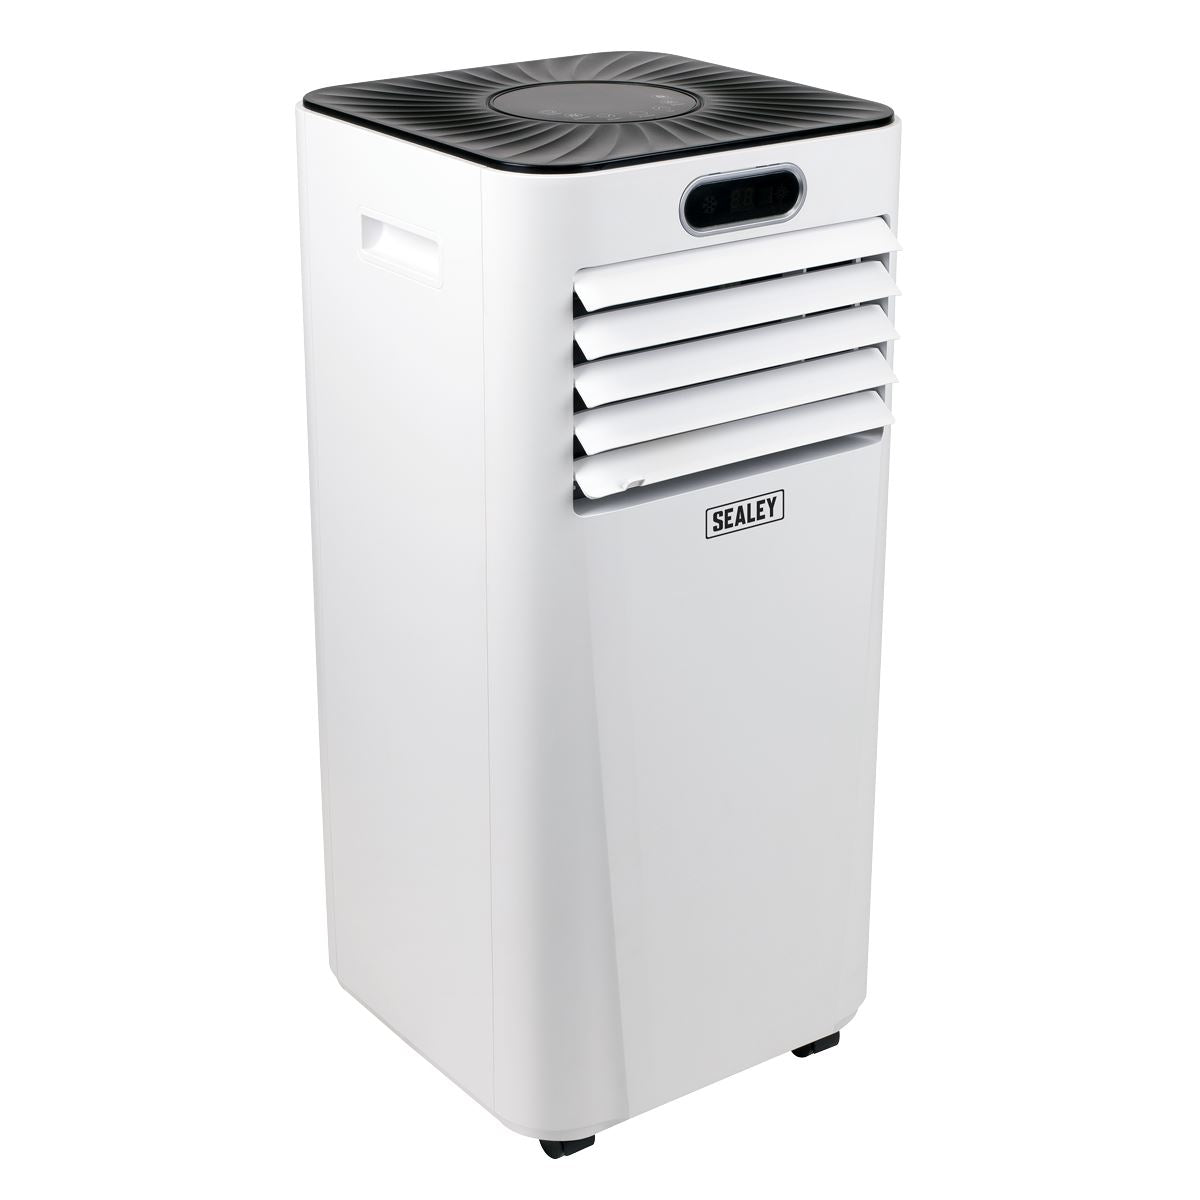 Sealey Portable Air Conditioner/Dehumidifier/Air Cooler with Window Sealing Kit 7,000Btu/hr